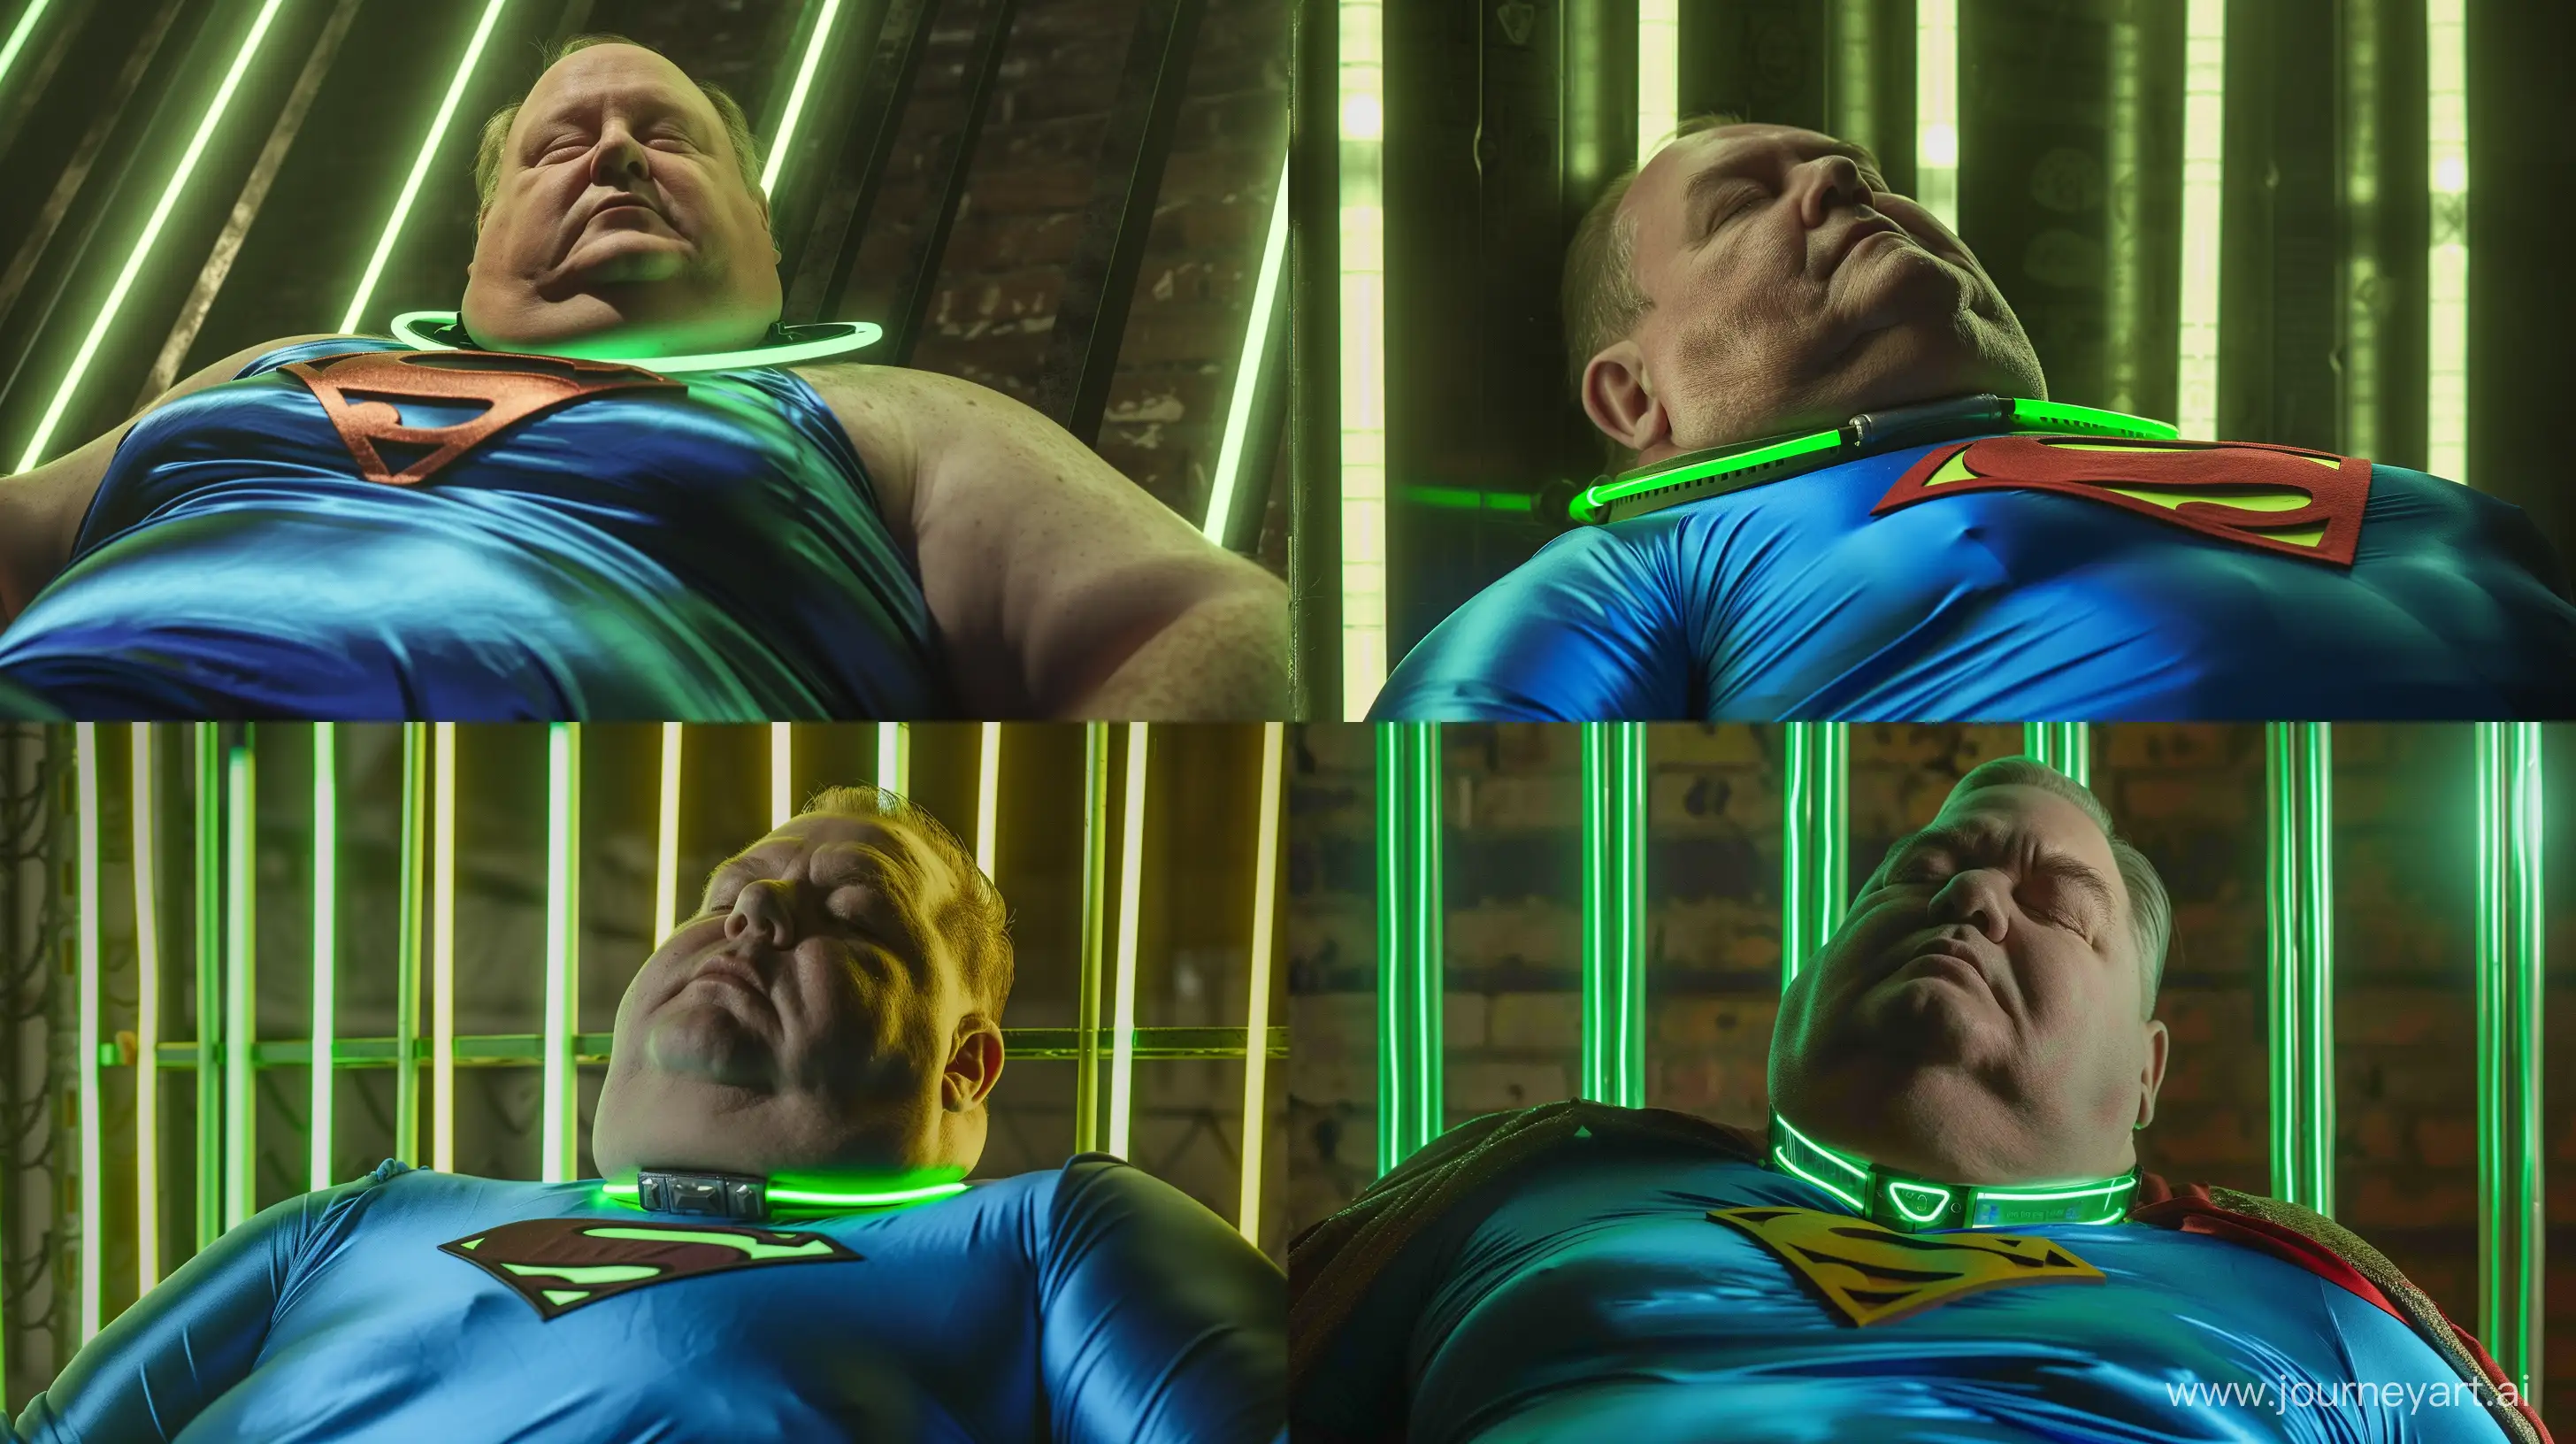 Extreme close-up portrait of a fat man aged 60 wearing a blue silk superman tight costume and a tight green glowing neon dog collar. Sleeping against green glowing green neon bars. Outside. Daylight. Natural Light. --style raw --ar 16:9